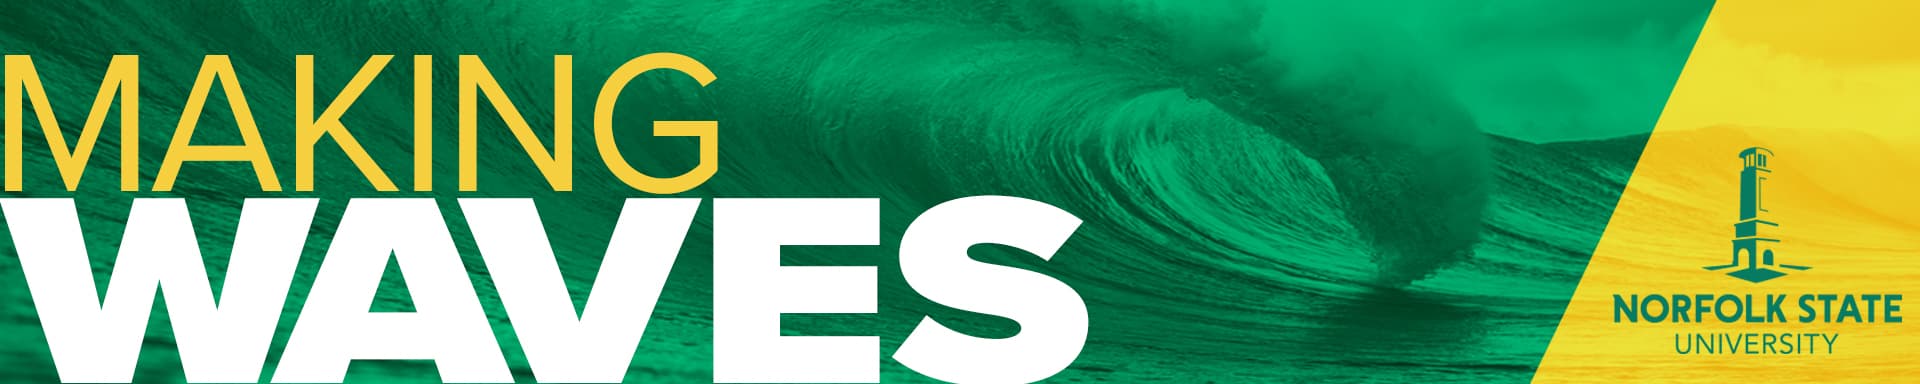 green ocean waves graphic with the words "Making Waves" in front of it